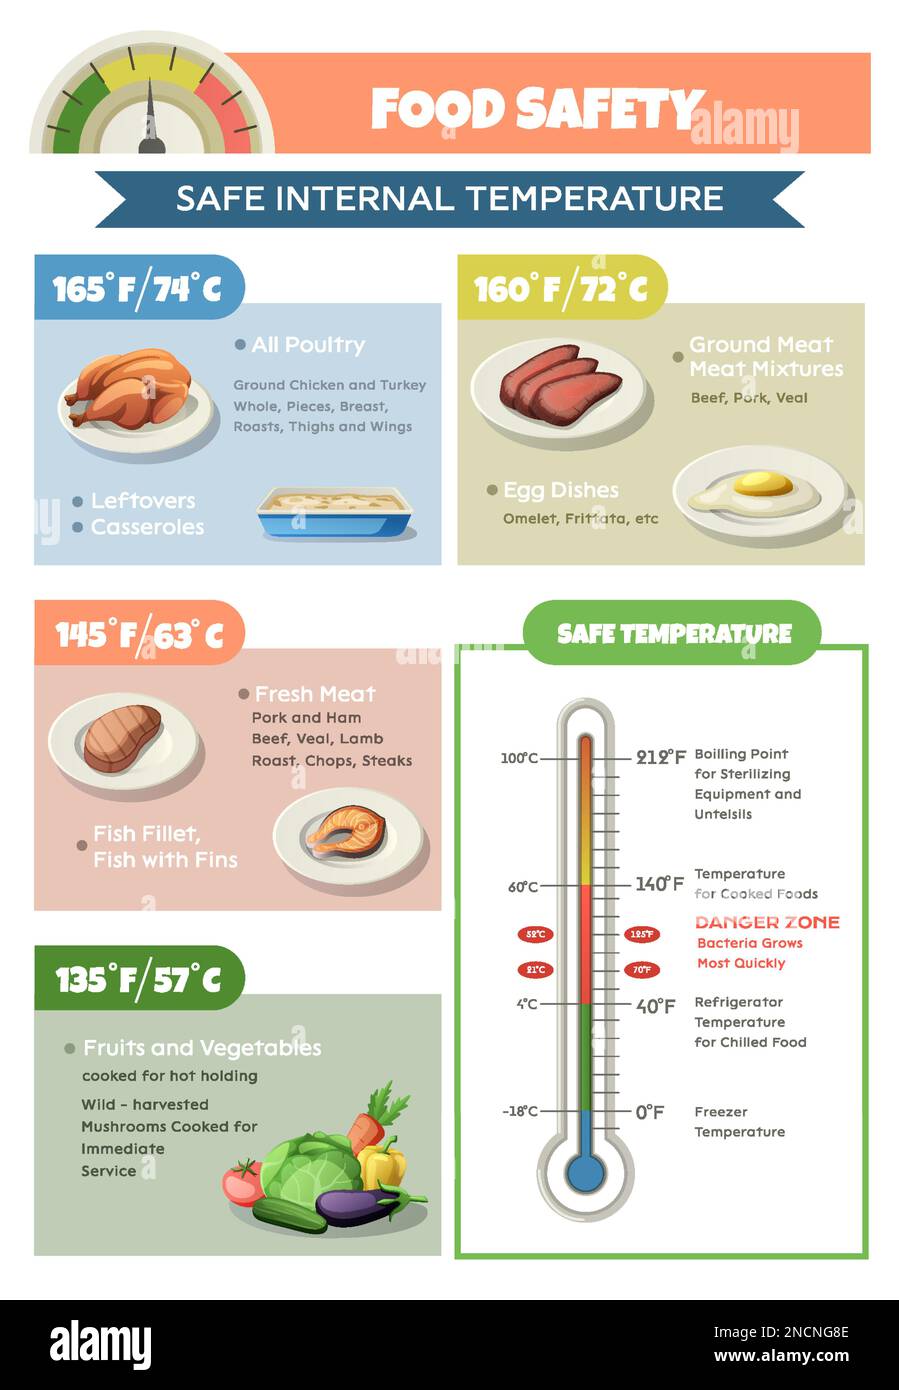 https://c8.alamy.com/comp/2NCNG8E/haccp-food-safety-infographics-with-editable-text-and-thermometer-with-color-coded-sections-for-safe-temperature-vector-illustration-2NCNG8E.jpg